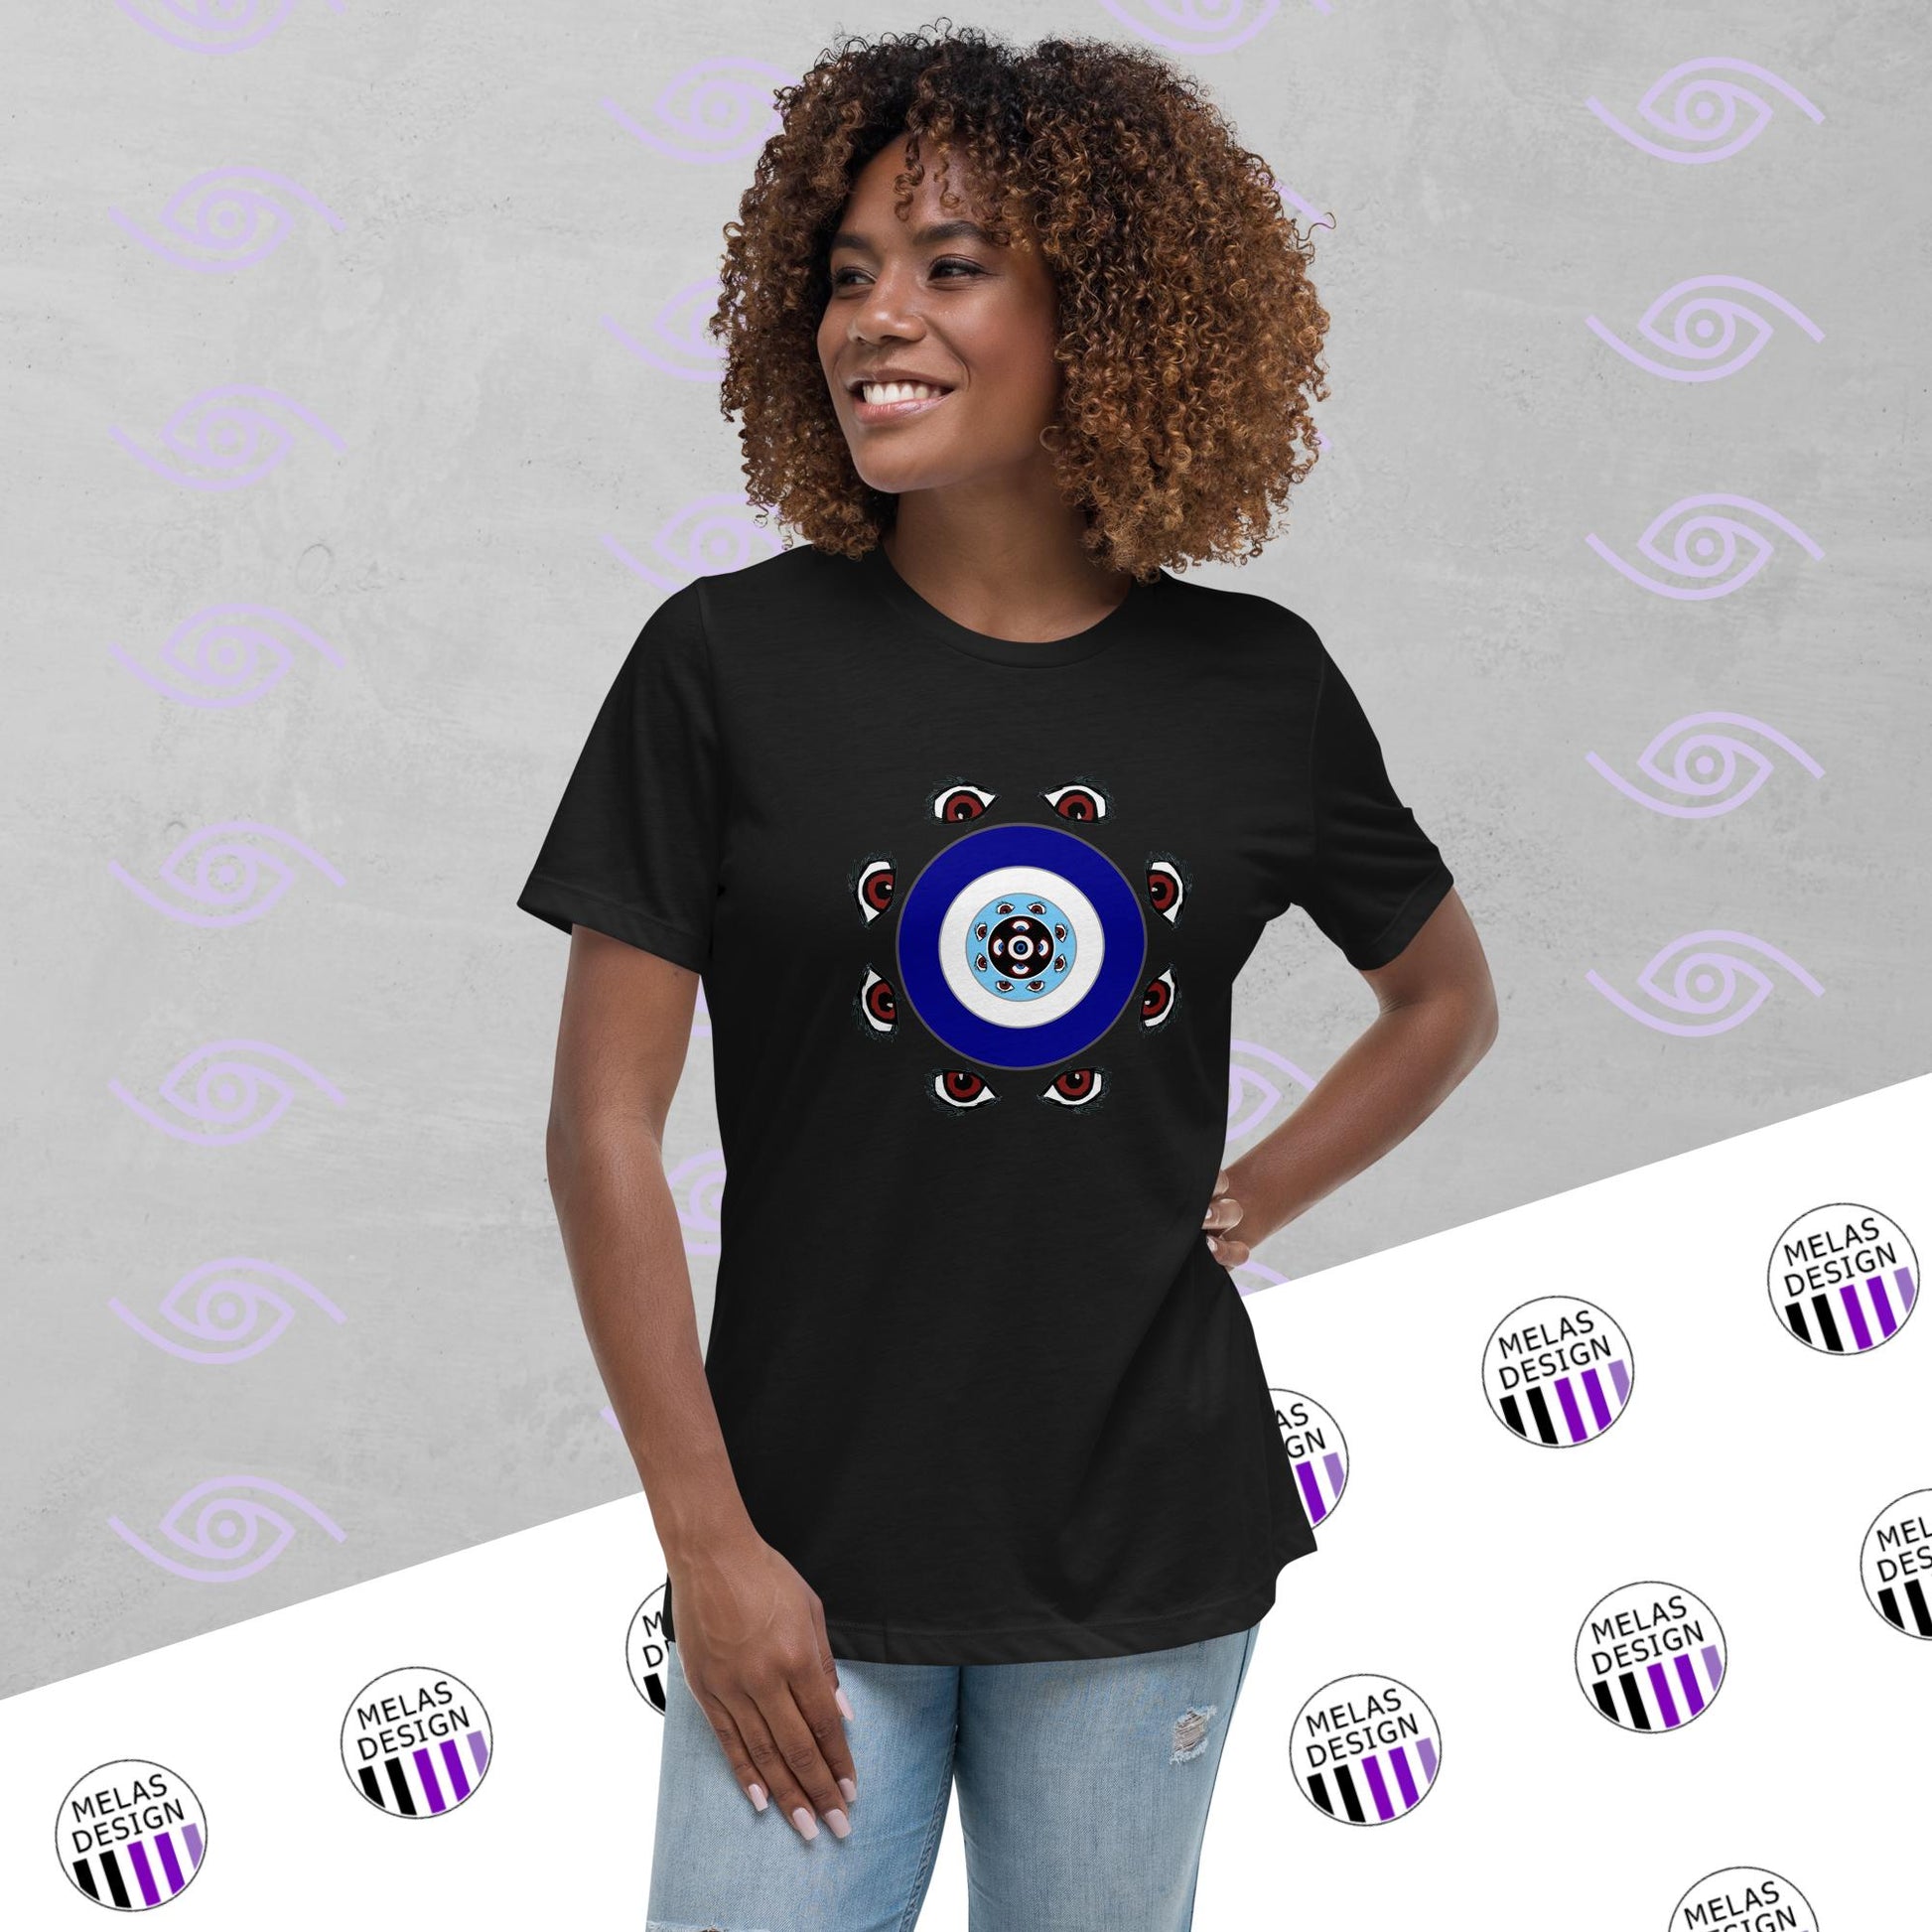 Evil Eye Mandala Women's Relaxed T-Shirt; evil eye; mandala; fashion; shirts; t-shirt; womens; relaxed fit; S-3XL; Melasdesign; Witchy Gothic Clothes Collection; small business